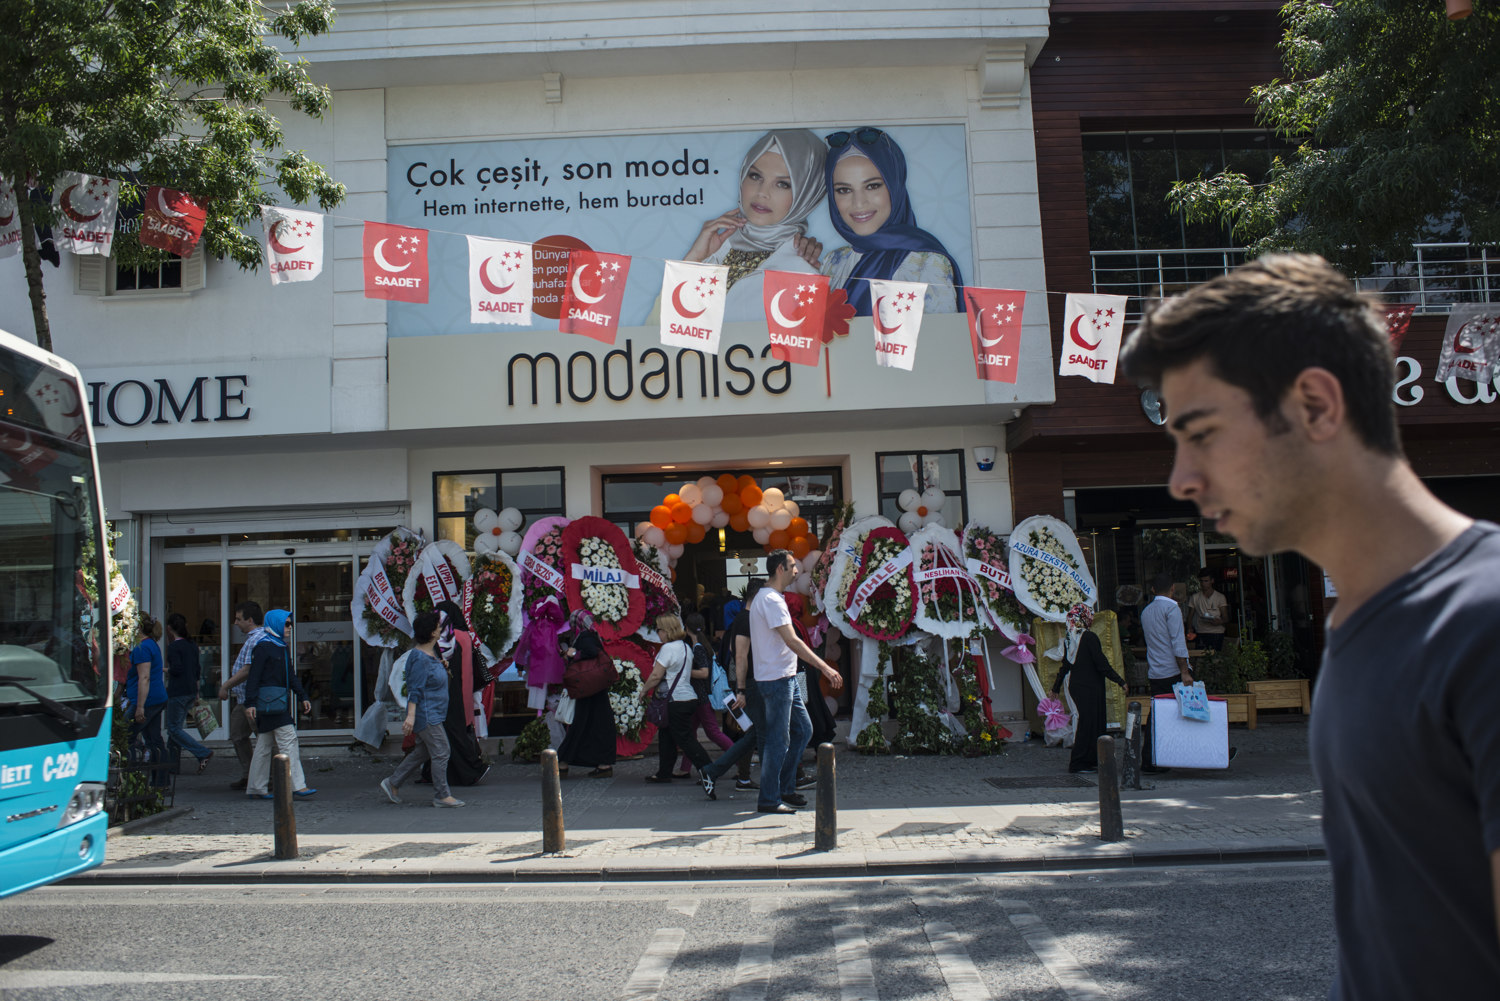  The grand opening of Modanisa's first store. The brand, previously found exclusively online is expanding to stores with two locations in Istanbul, Turkey.  